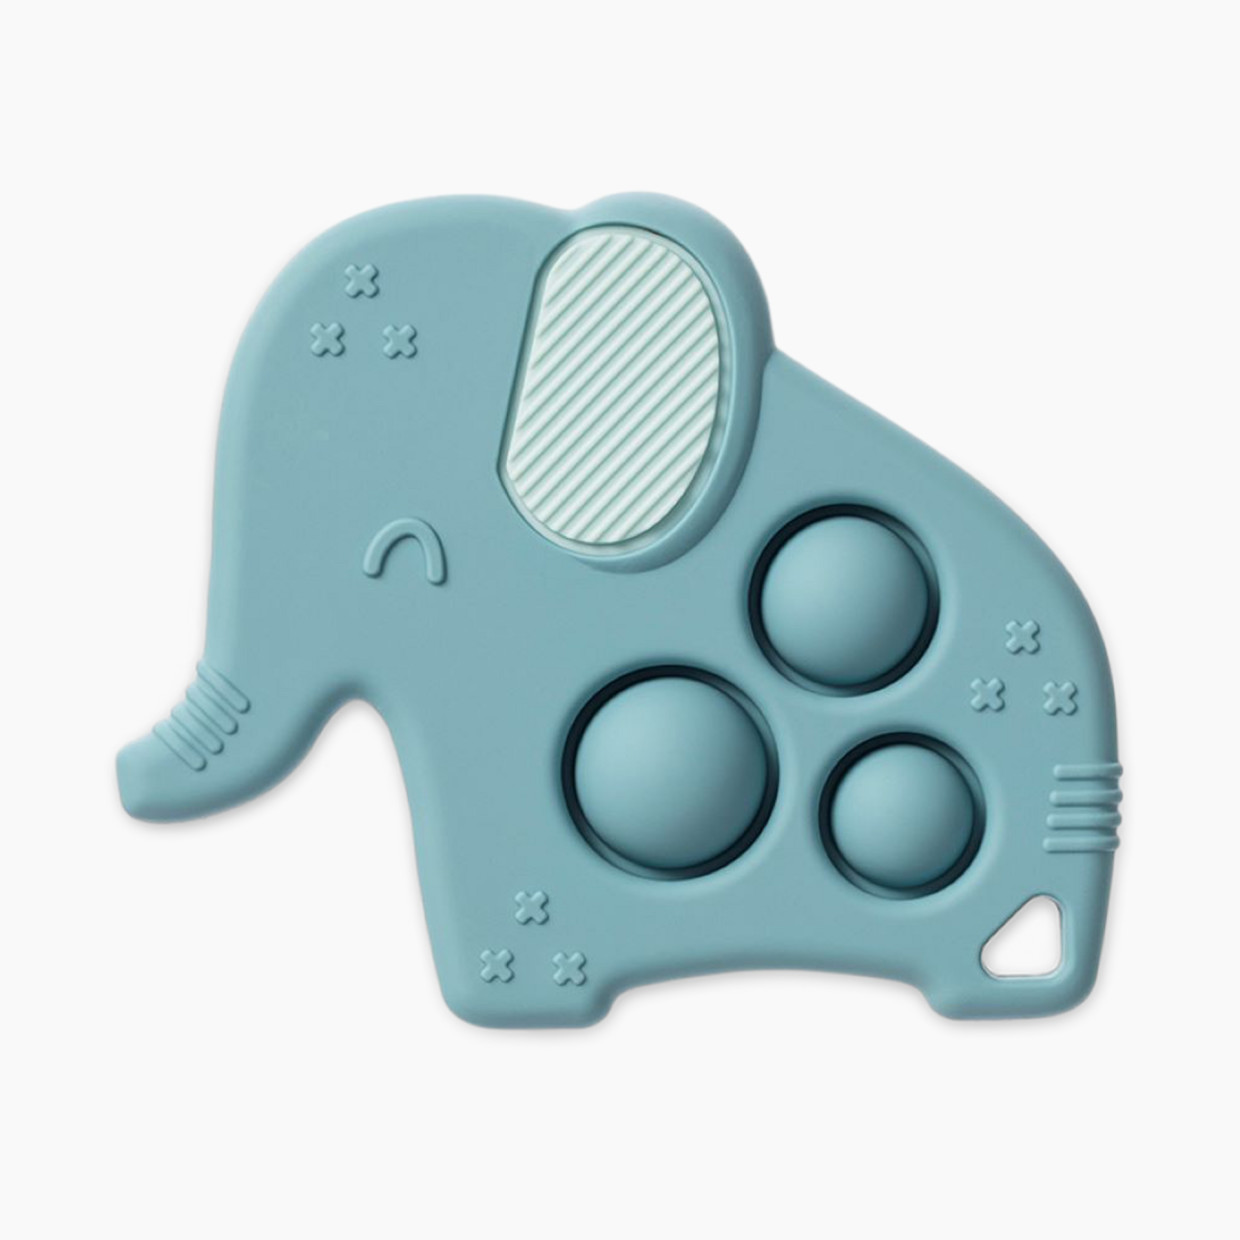 Itzy Ritzy Silicone Teether with Sensory Popper - Elephant.